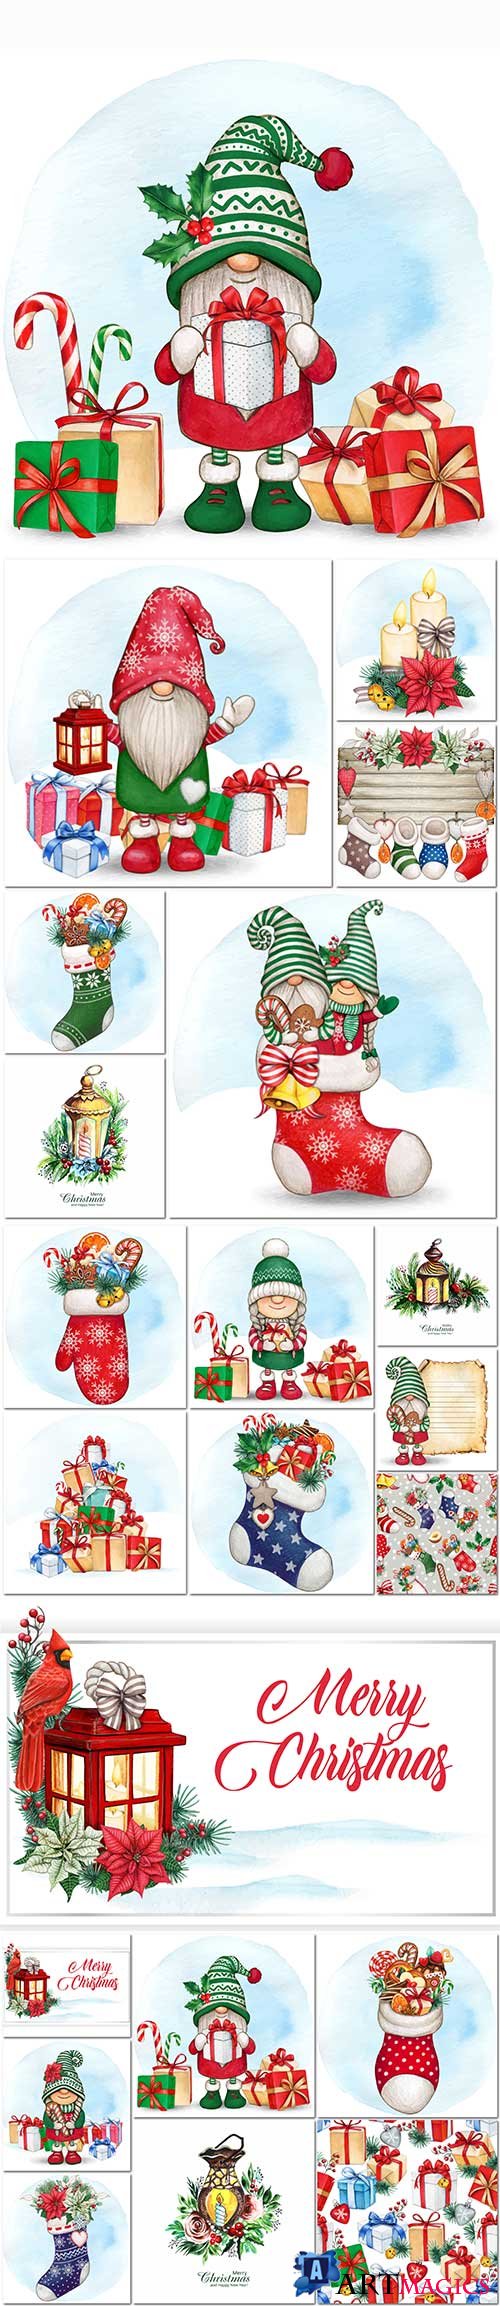 Watercolor hand drawn santa with holiday decorations and elements in vector